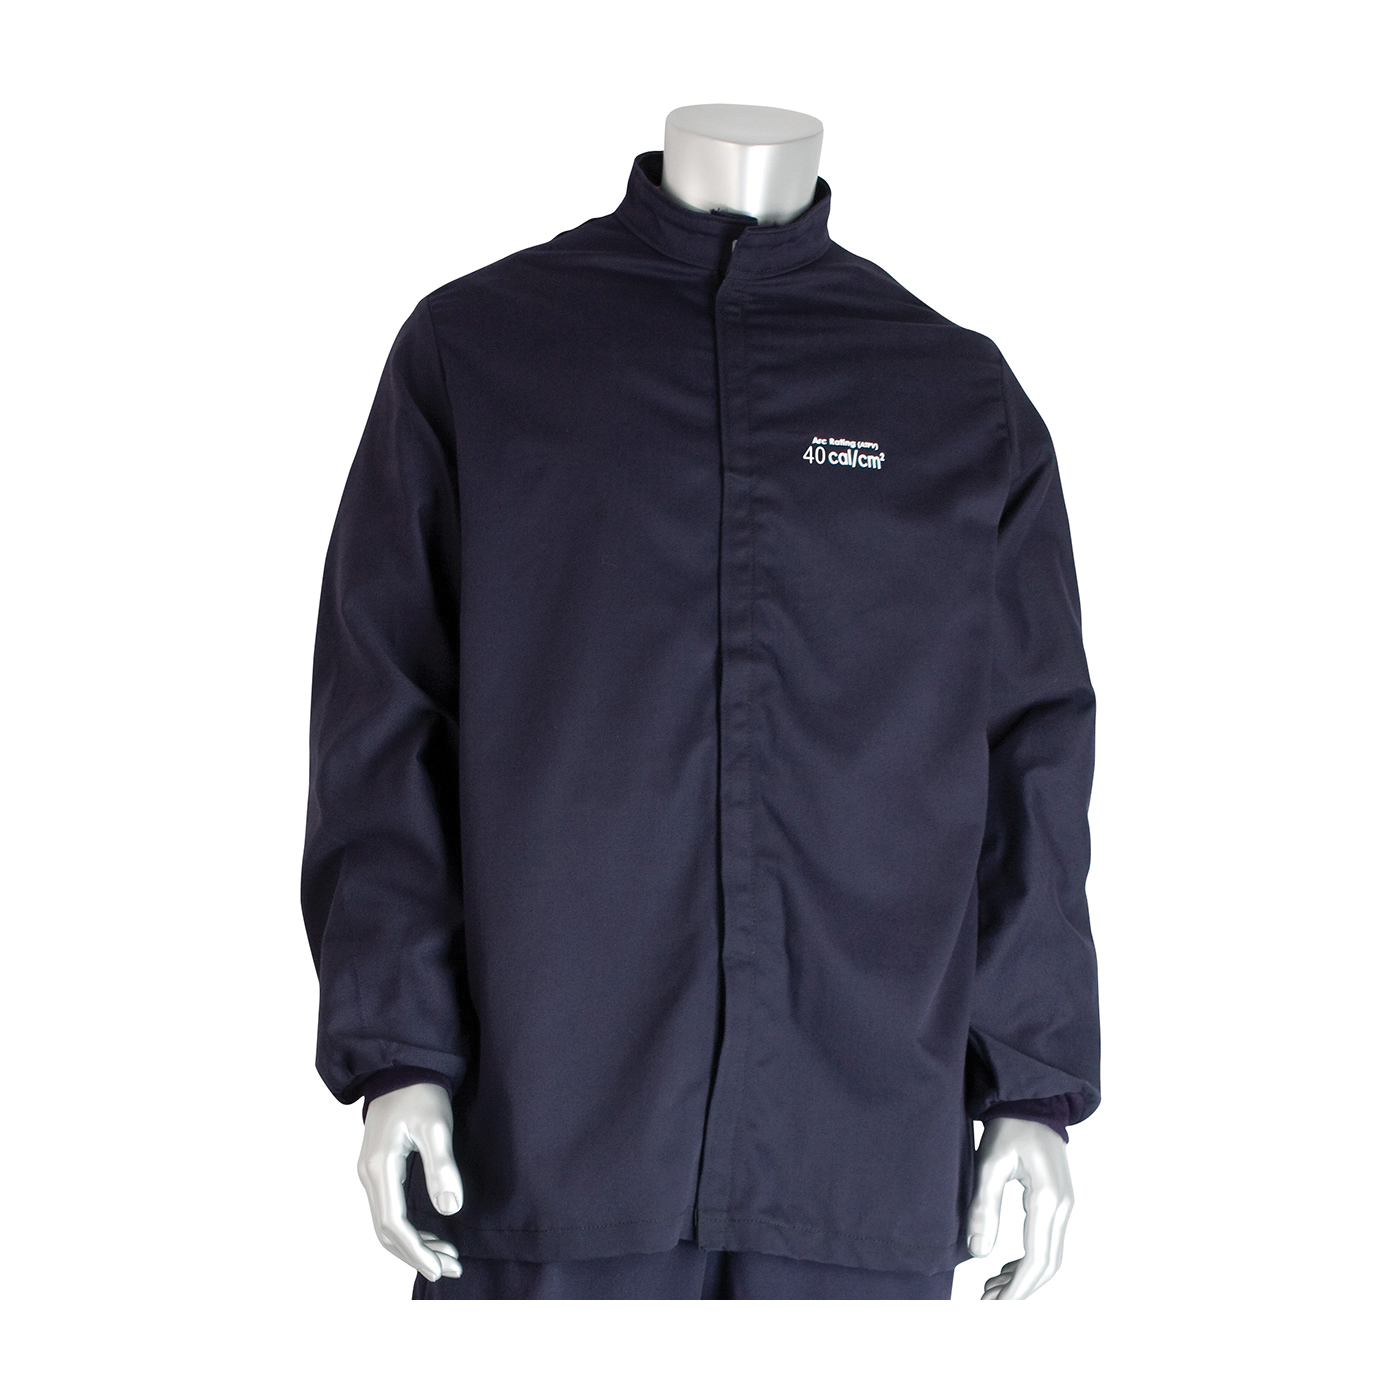 PIP® 9100-52412/2X Arc and Flame Resistant Jacket, 2XL, Navy, Westex® UltraSoft® 88% Cotton 12% High Tenacity Nylon, 52 to 54 in Chest, Resists: Arc and Flame, ASTM F1506-10a, ASTM F2178-12